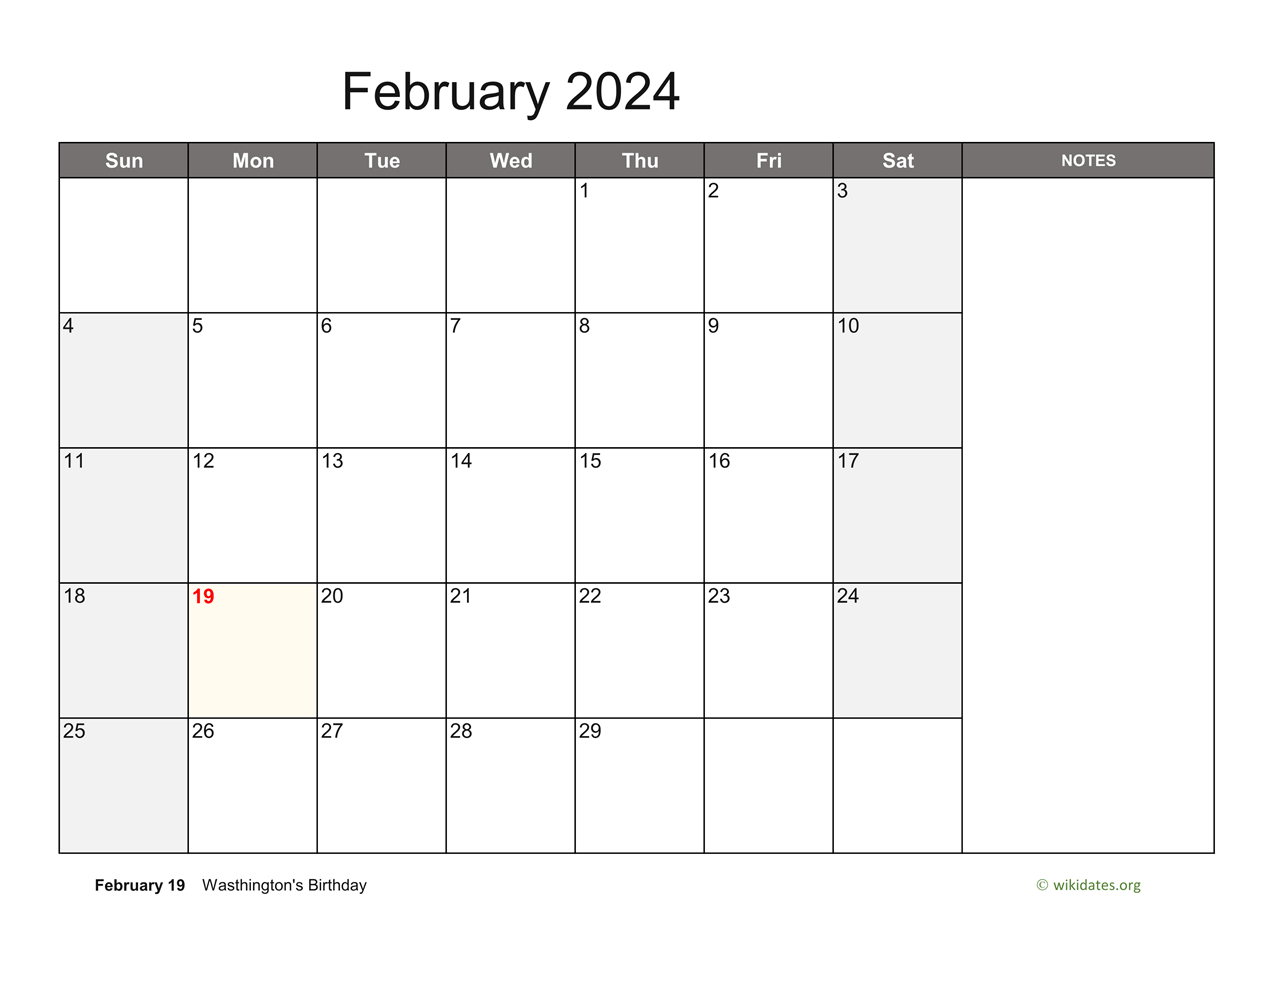 February 2024 Calendar with Notes | WikiDates.org